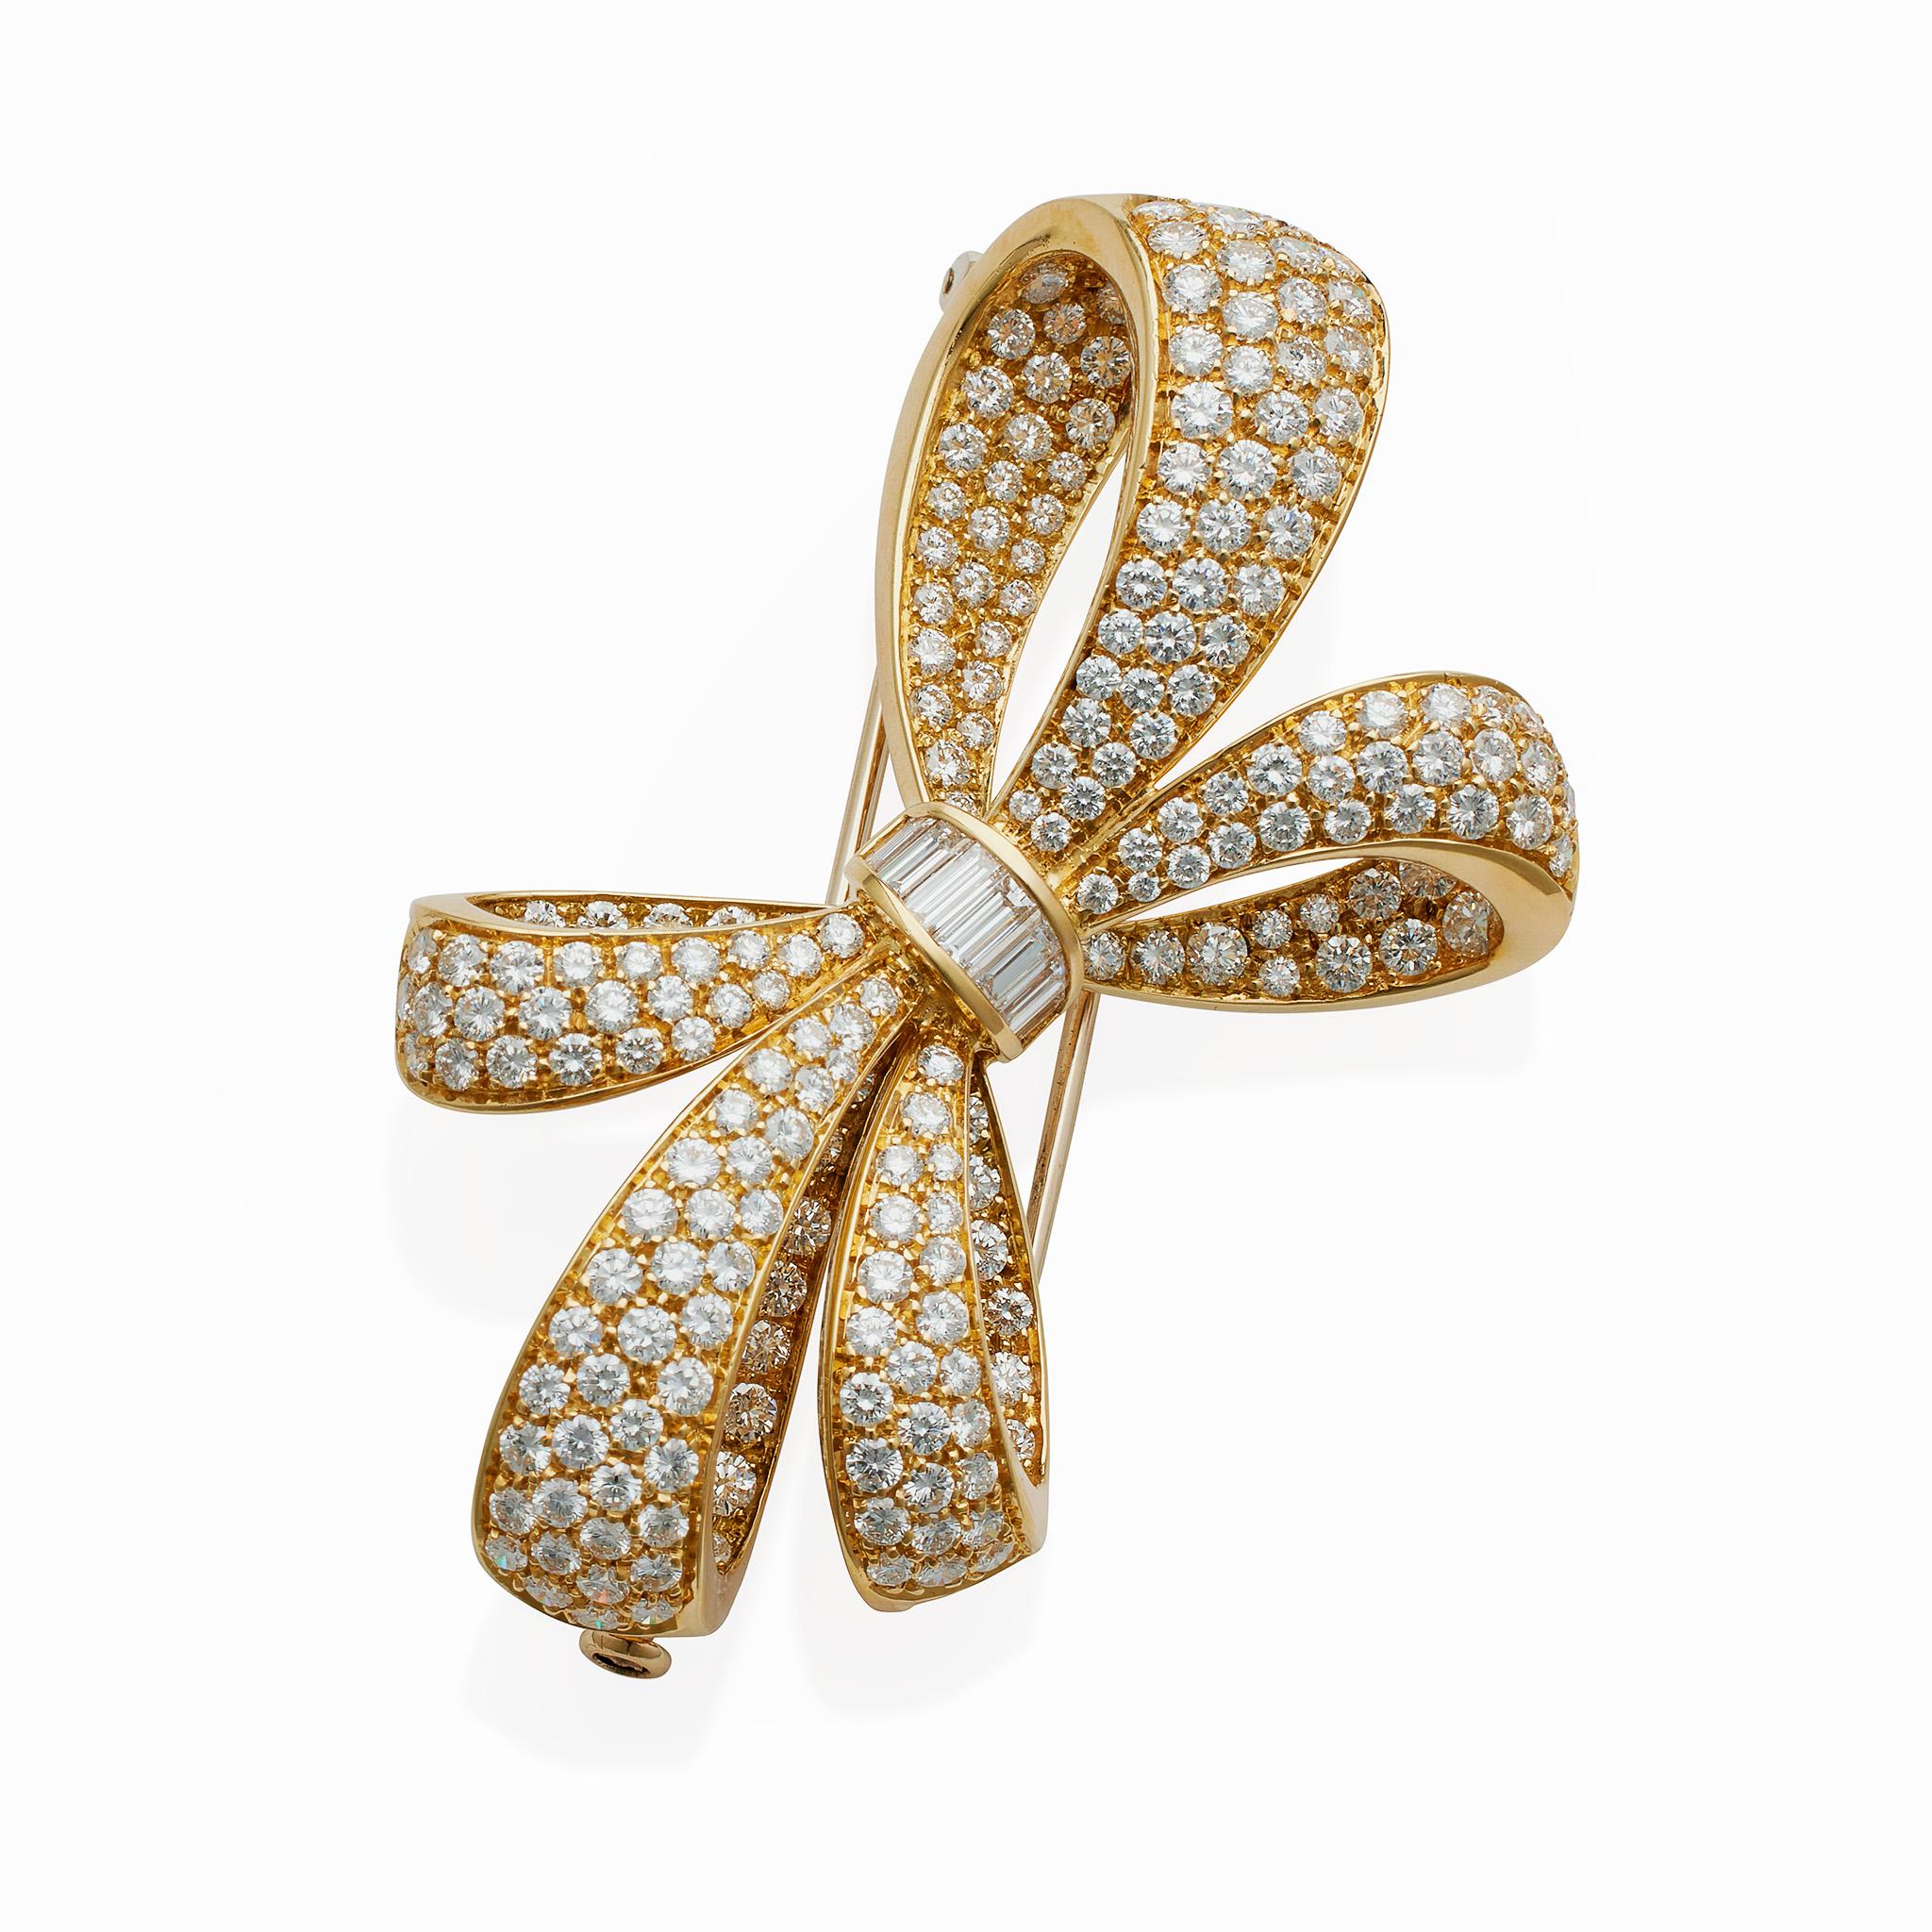 Dating from circa 1997, this 18K gold Tiffany & Co. bow brooch is set with over 7 carats of diamonds. It is designed as a highly three dimensional bow of five loops pavé-set throughout with round brilliant-cut diamonds, its center channel-set with a